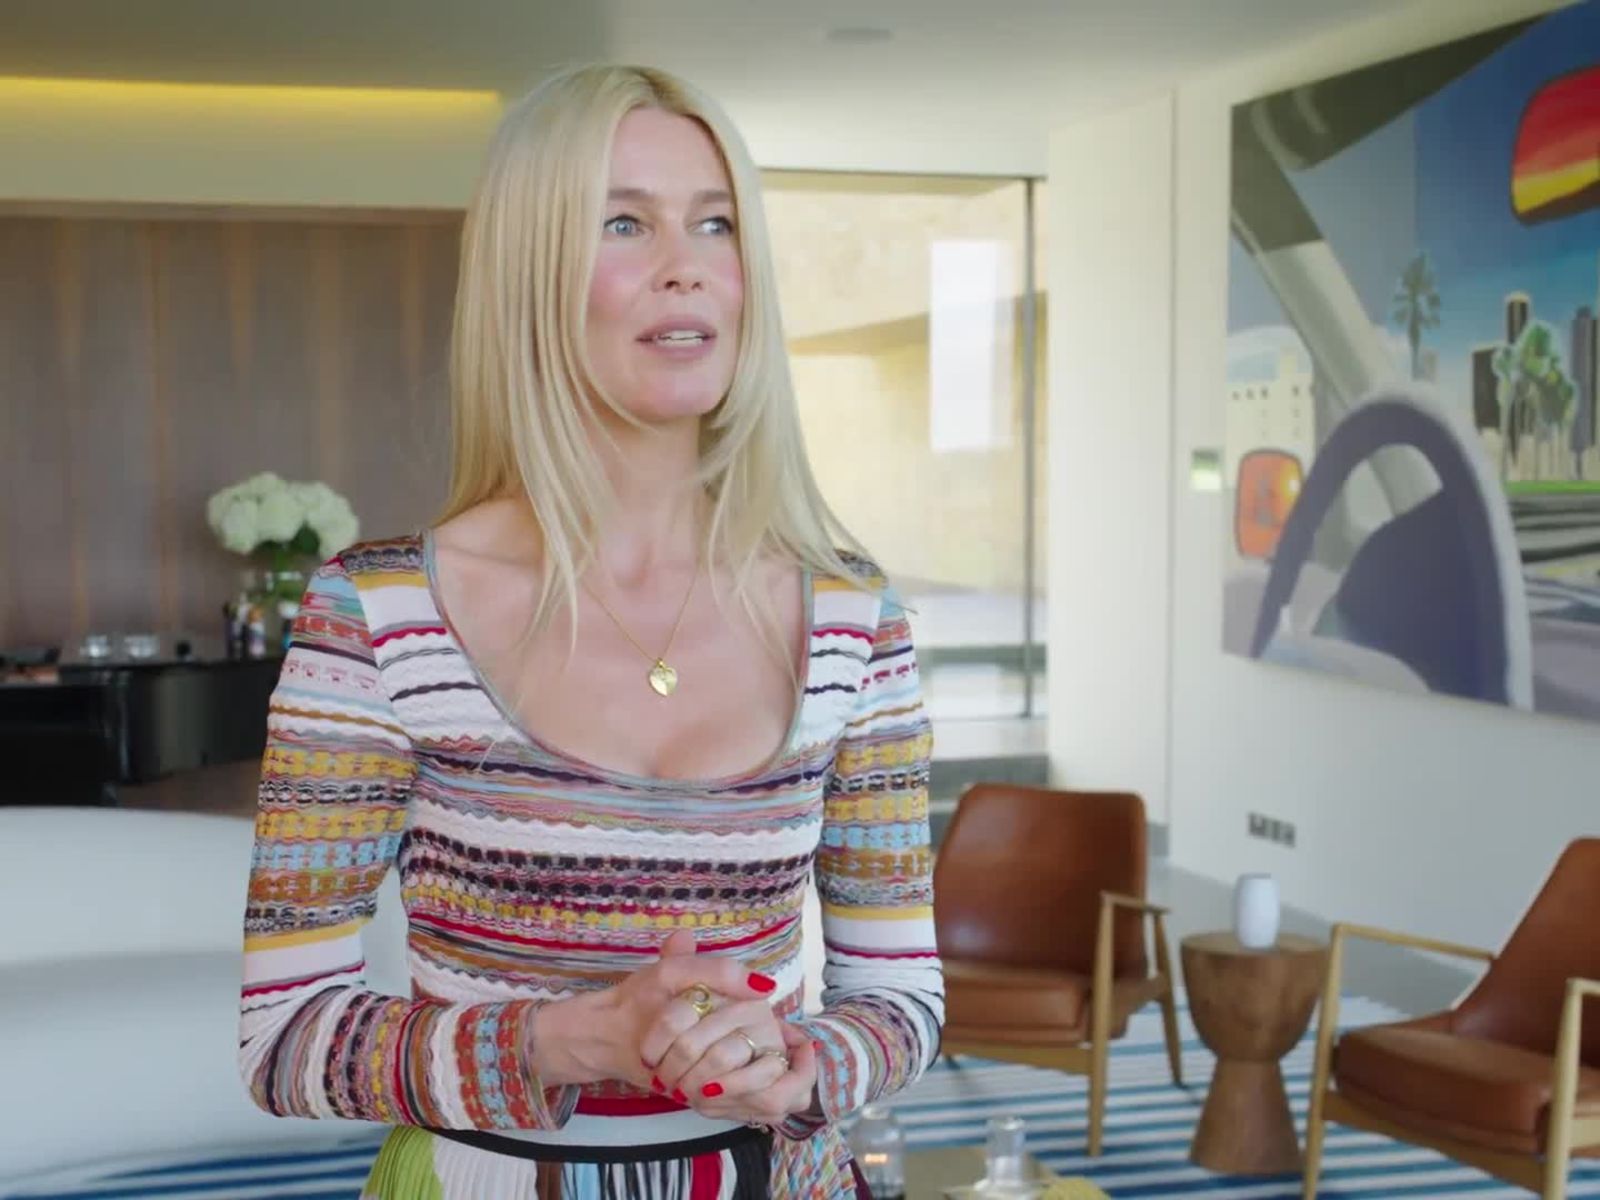 Claudia Schiffer’s Cotswolds Home Is Filled With Ceramics, Chocolate, and Lots of Chanel